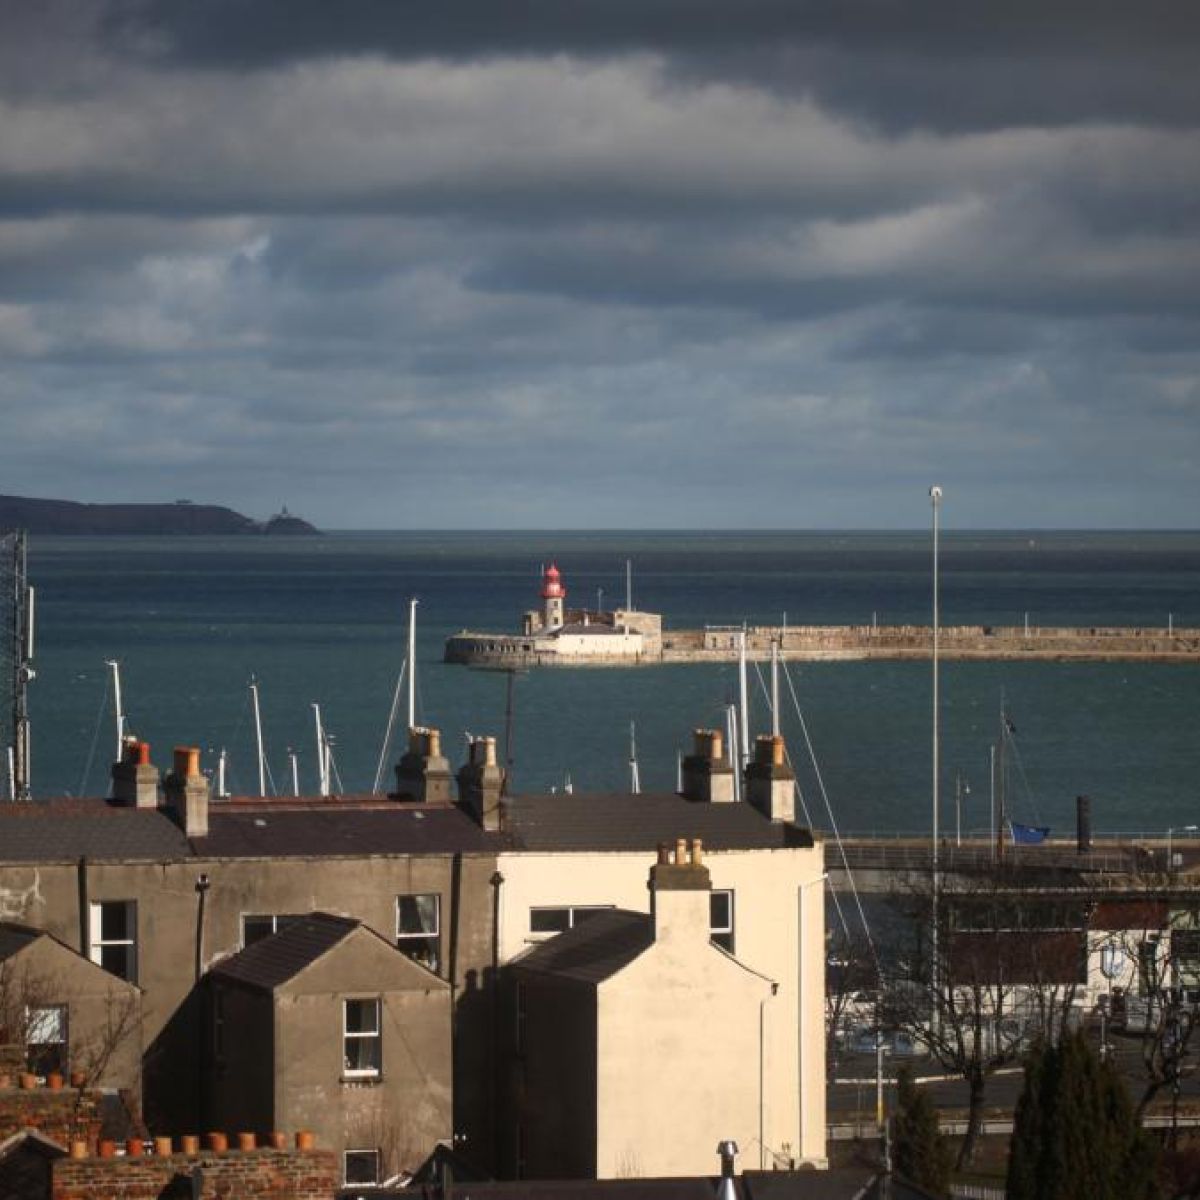 The 10 best hotels & places to stay in Dun Laoghaire, Ireland 